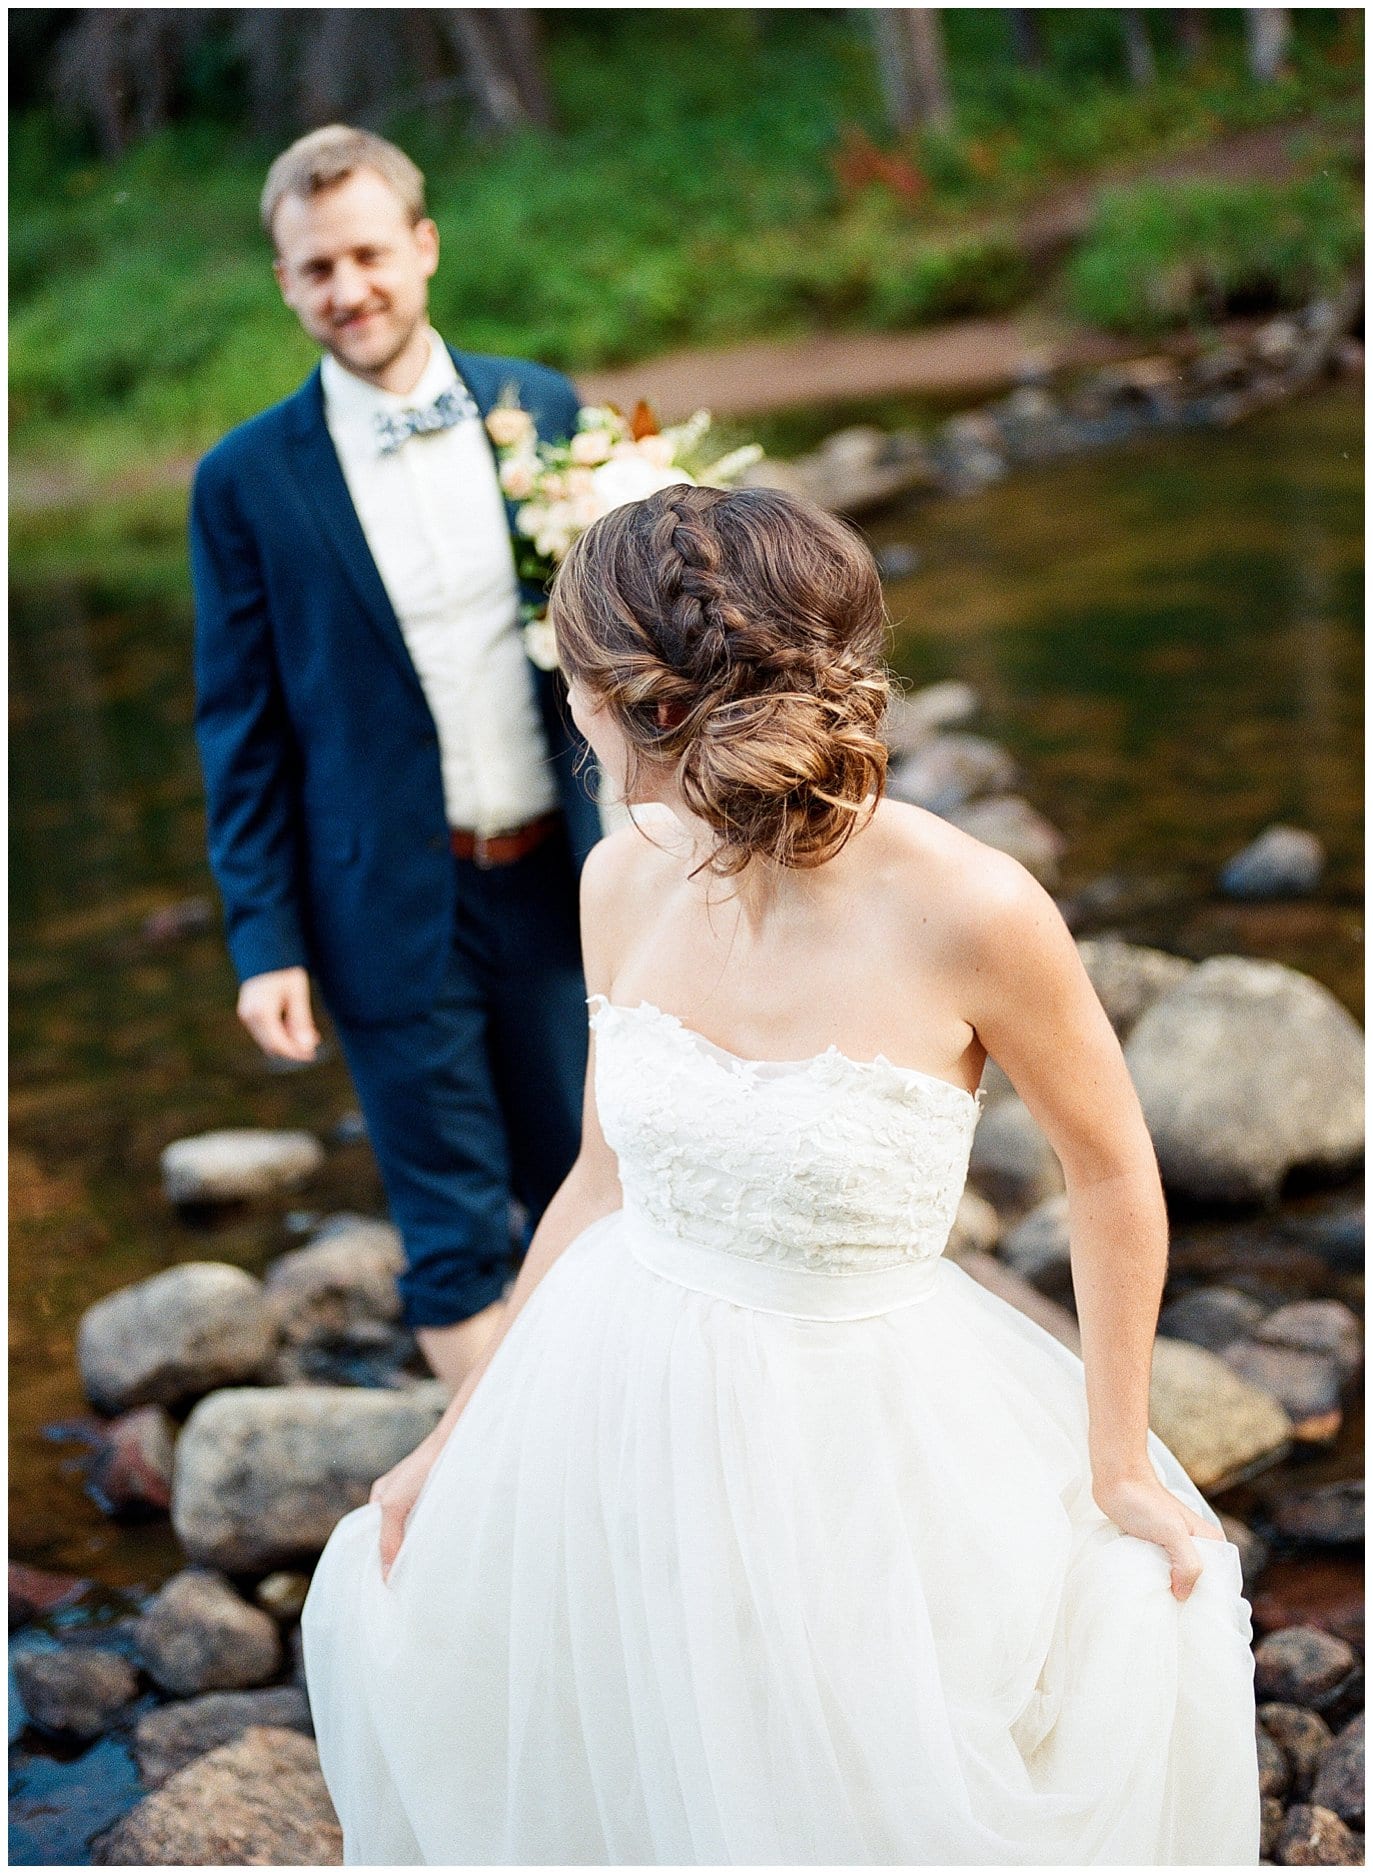 french braid wedding updo at Piney River Ranch intimate wedding by Beaver Creek wedding photographer Jennie Crate Photographer